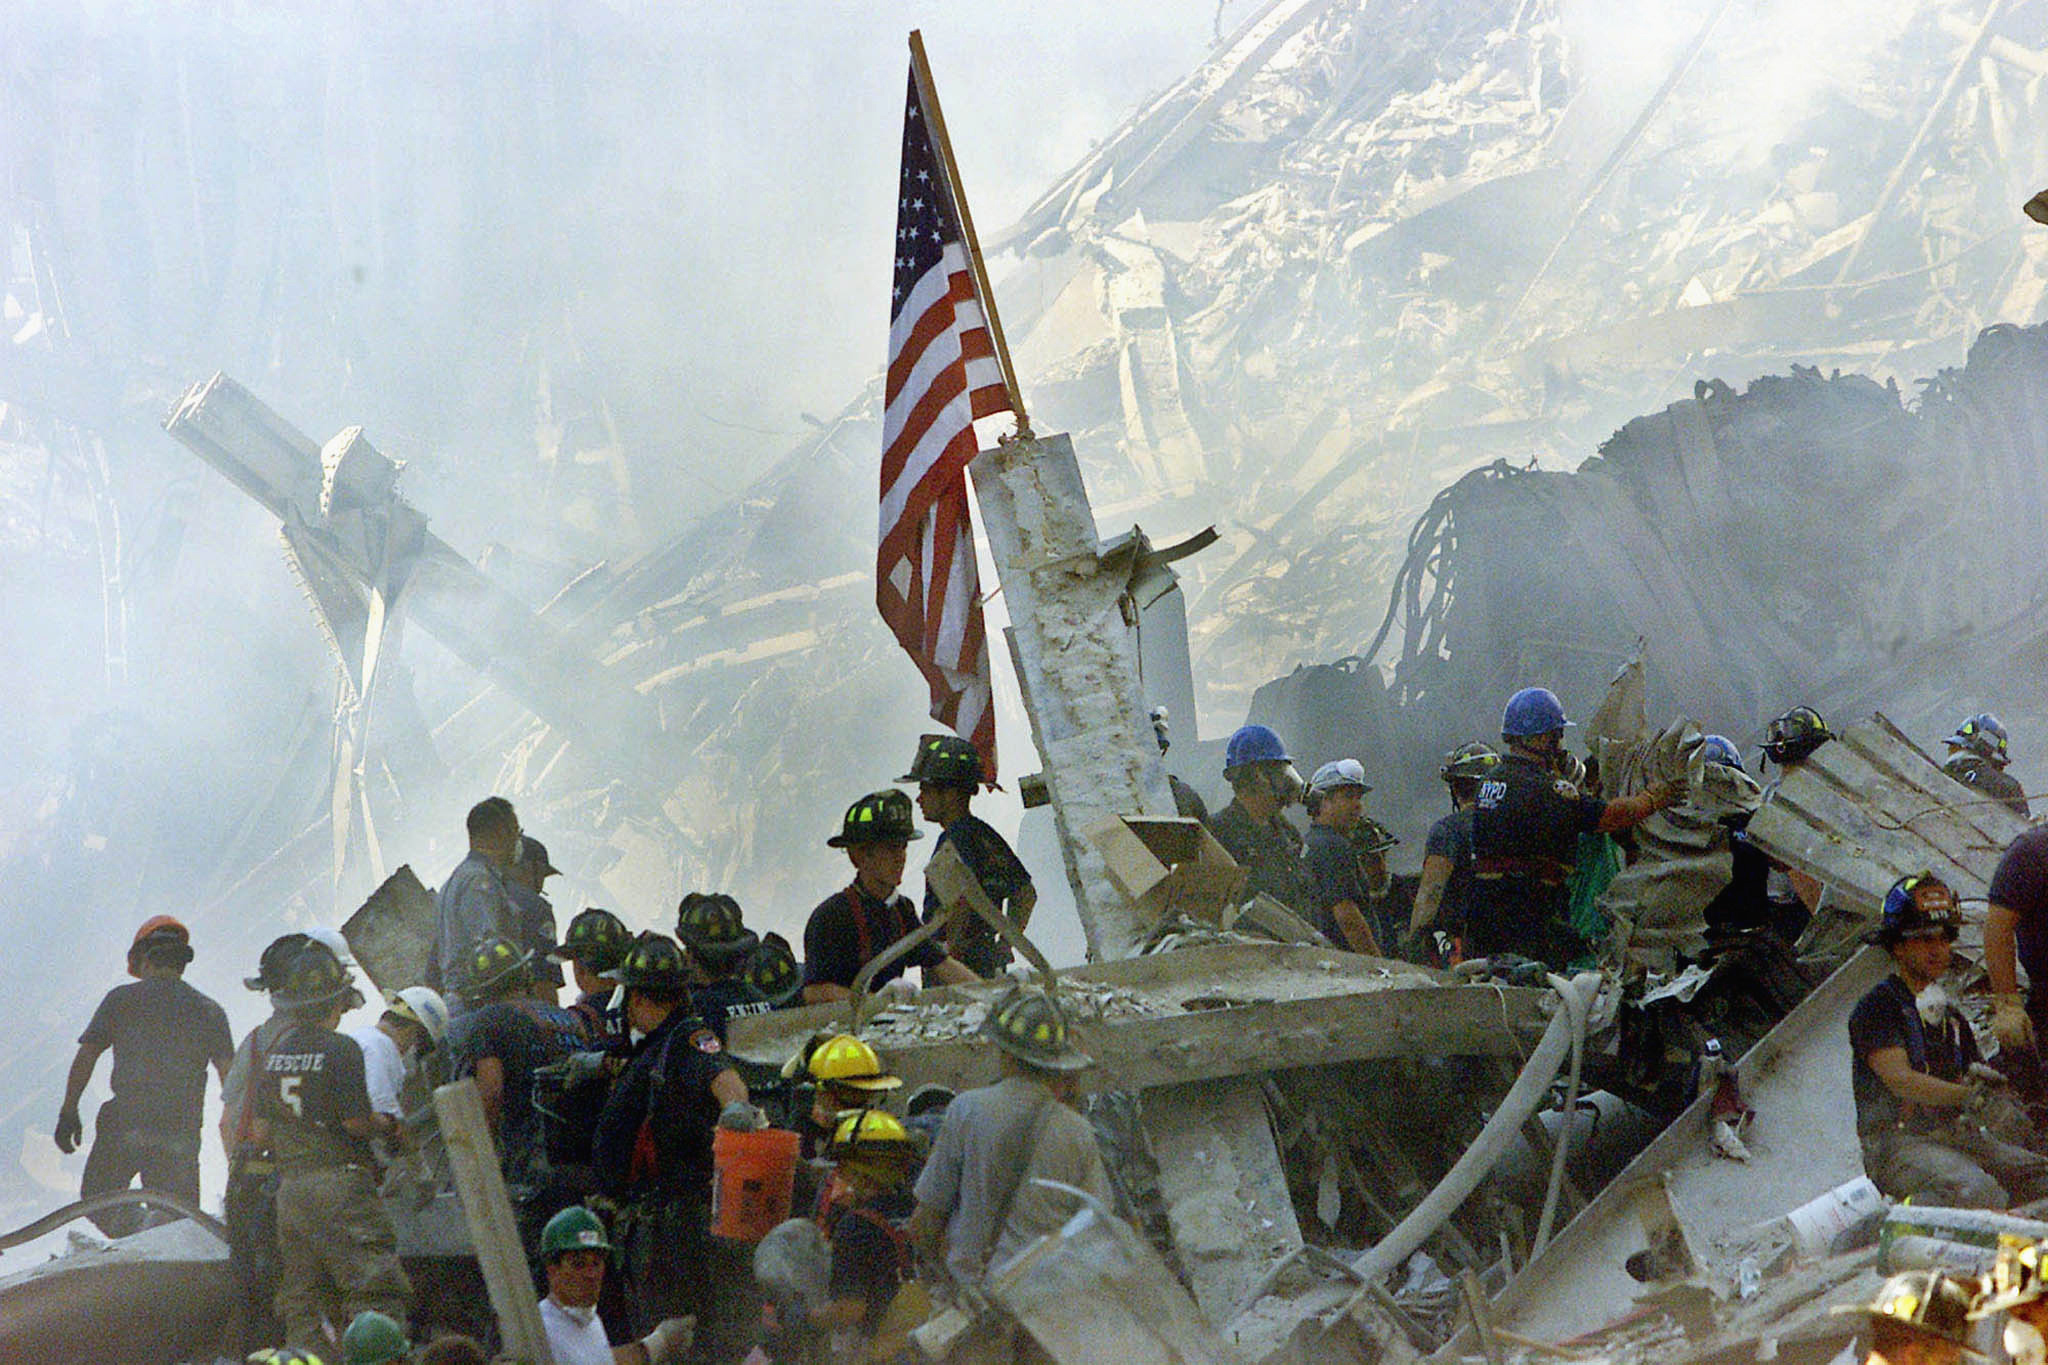 NatGeo - US FLAG STANDS AMIDST WORLD TRADE RUBBLE